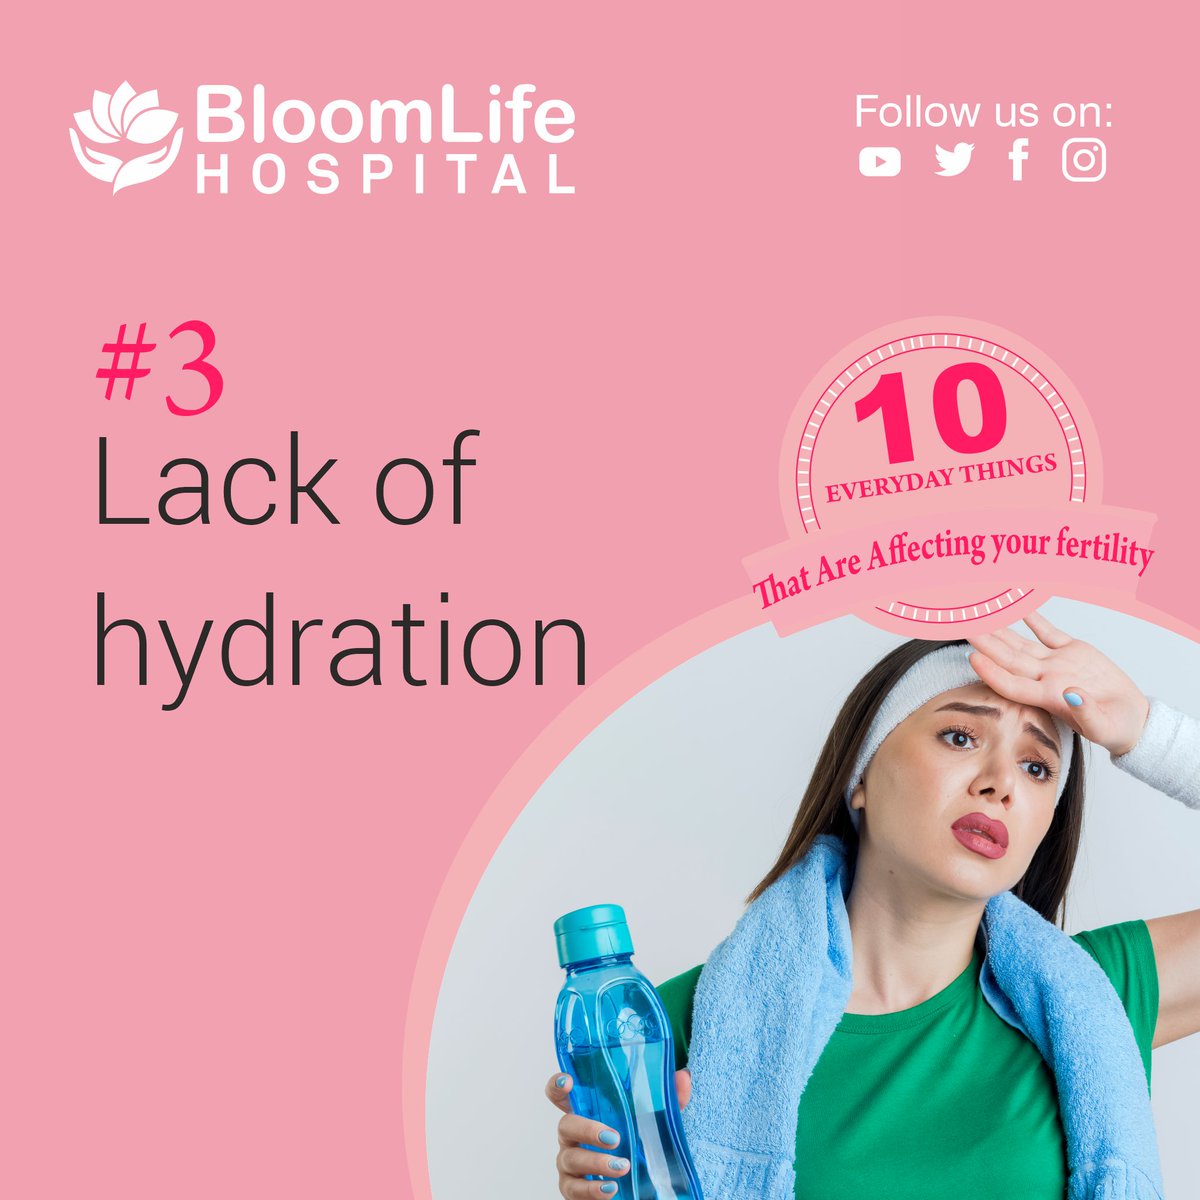 10 Everyday Things That Are Affecting your fertility 
#3 Lack of hydration - bit.ly/42wQHfE

#fertilityhealth #laptopoverheating #reproductiverisks #spermhealth #electromagneticradiation #fertilitytips #healthylifestyle #digitalhealth #reproductivewellness